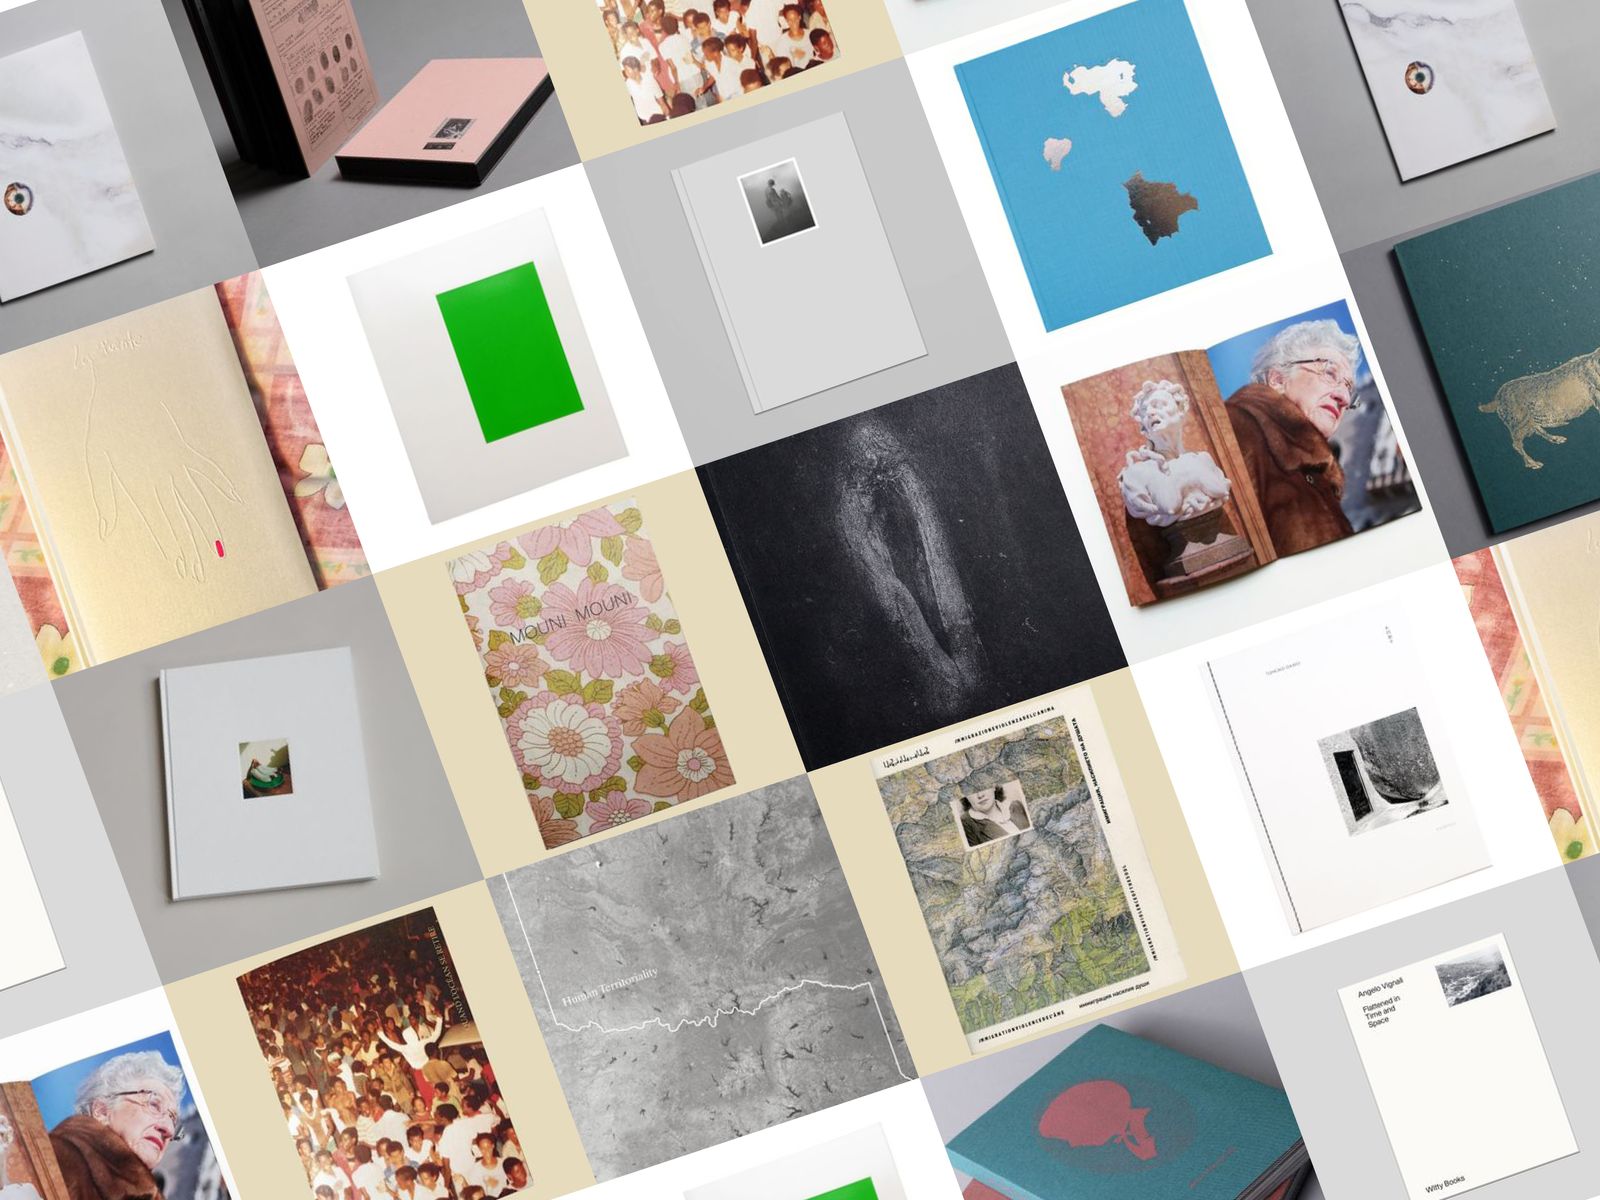 A preview of the photobooks currently available at phmuseum.com/photobooks